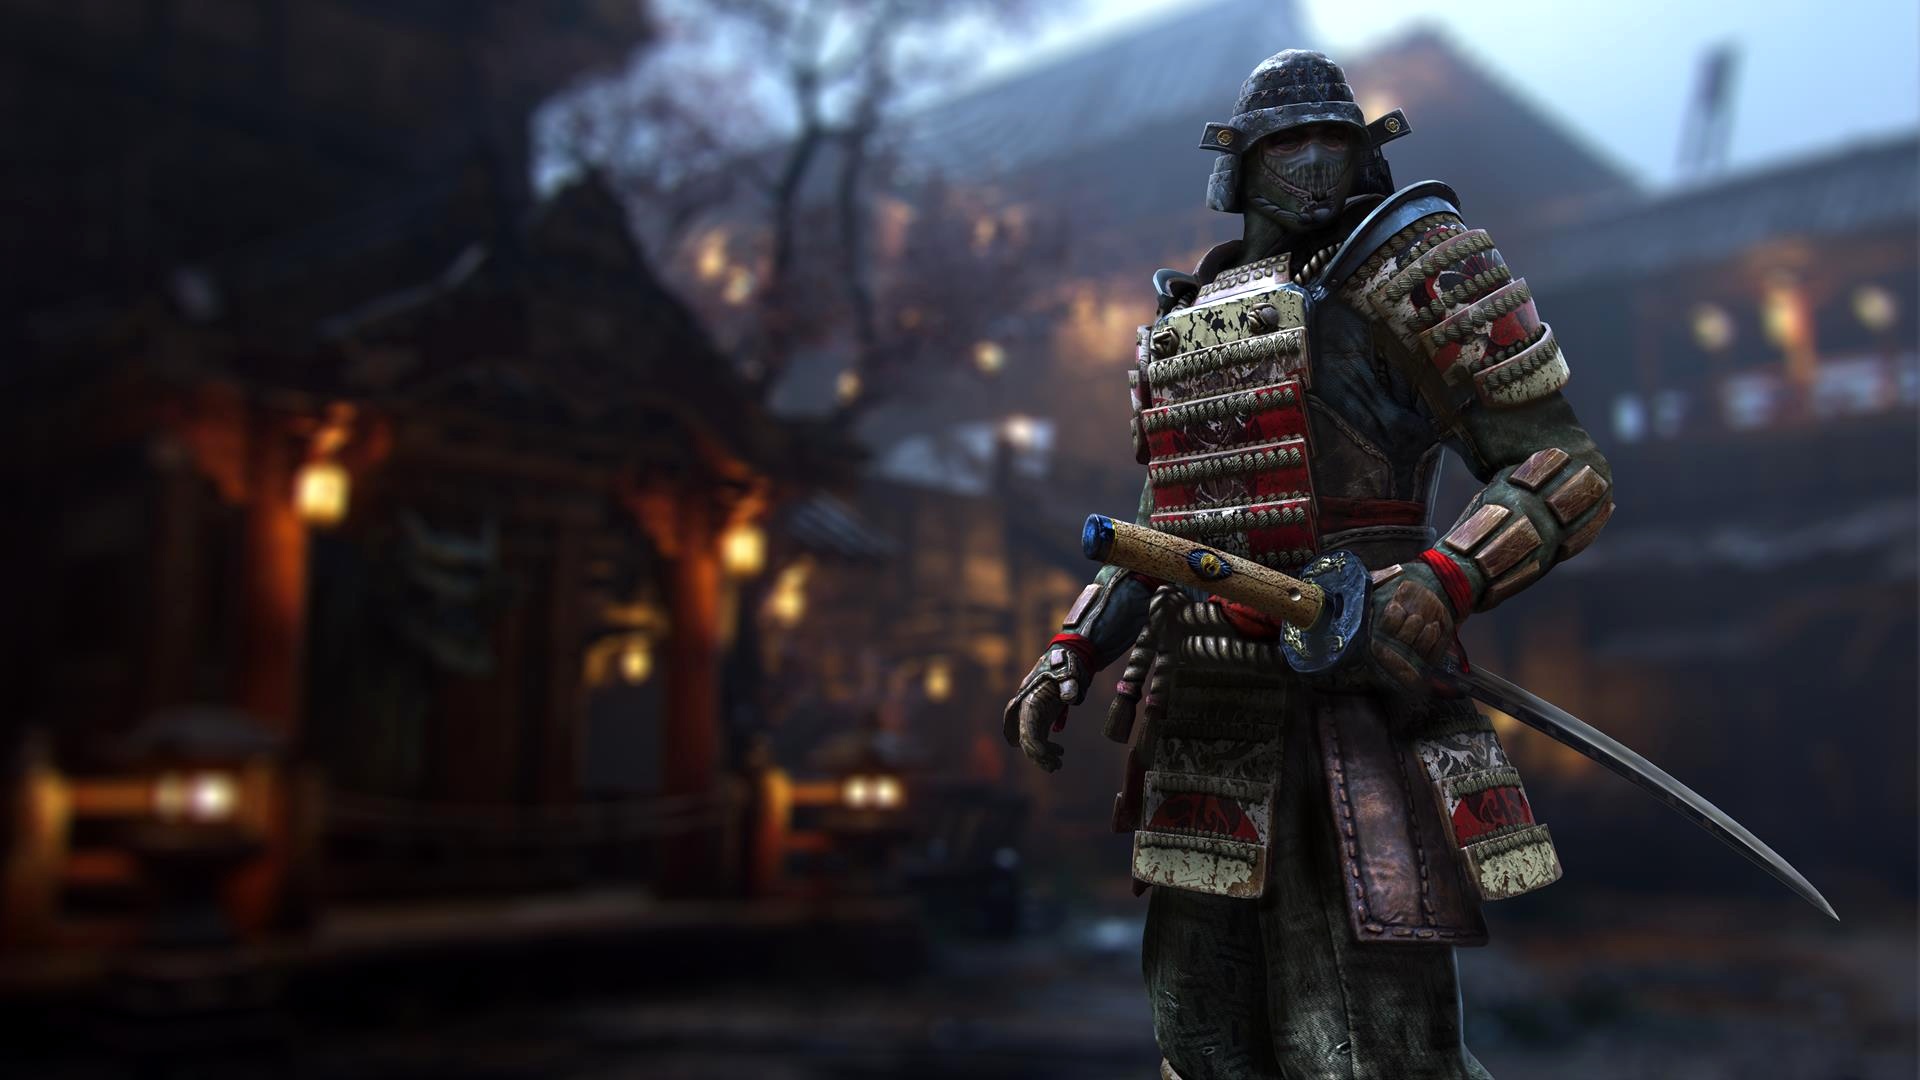 120+ For Honor HD Wallpapers and Backgrounds